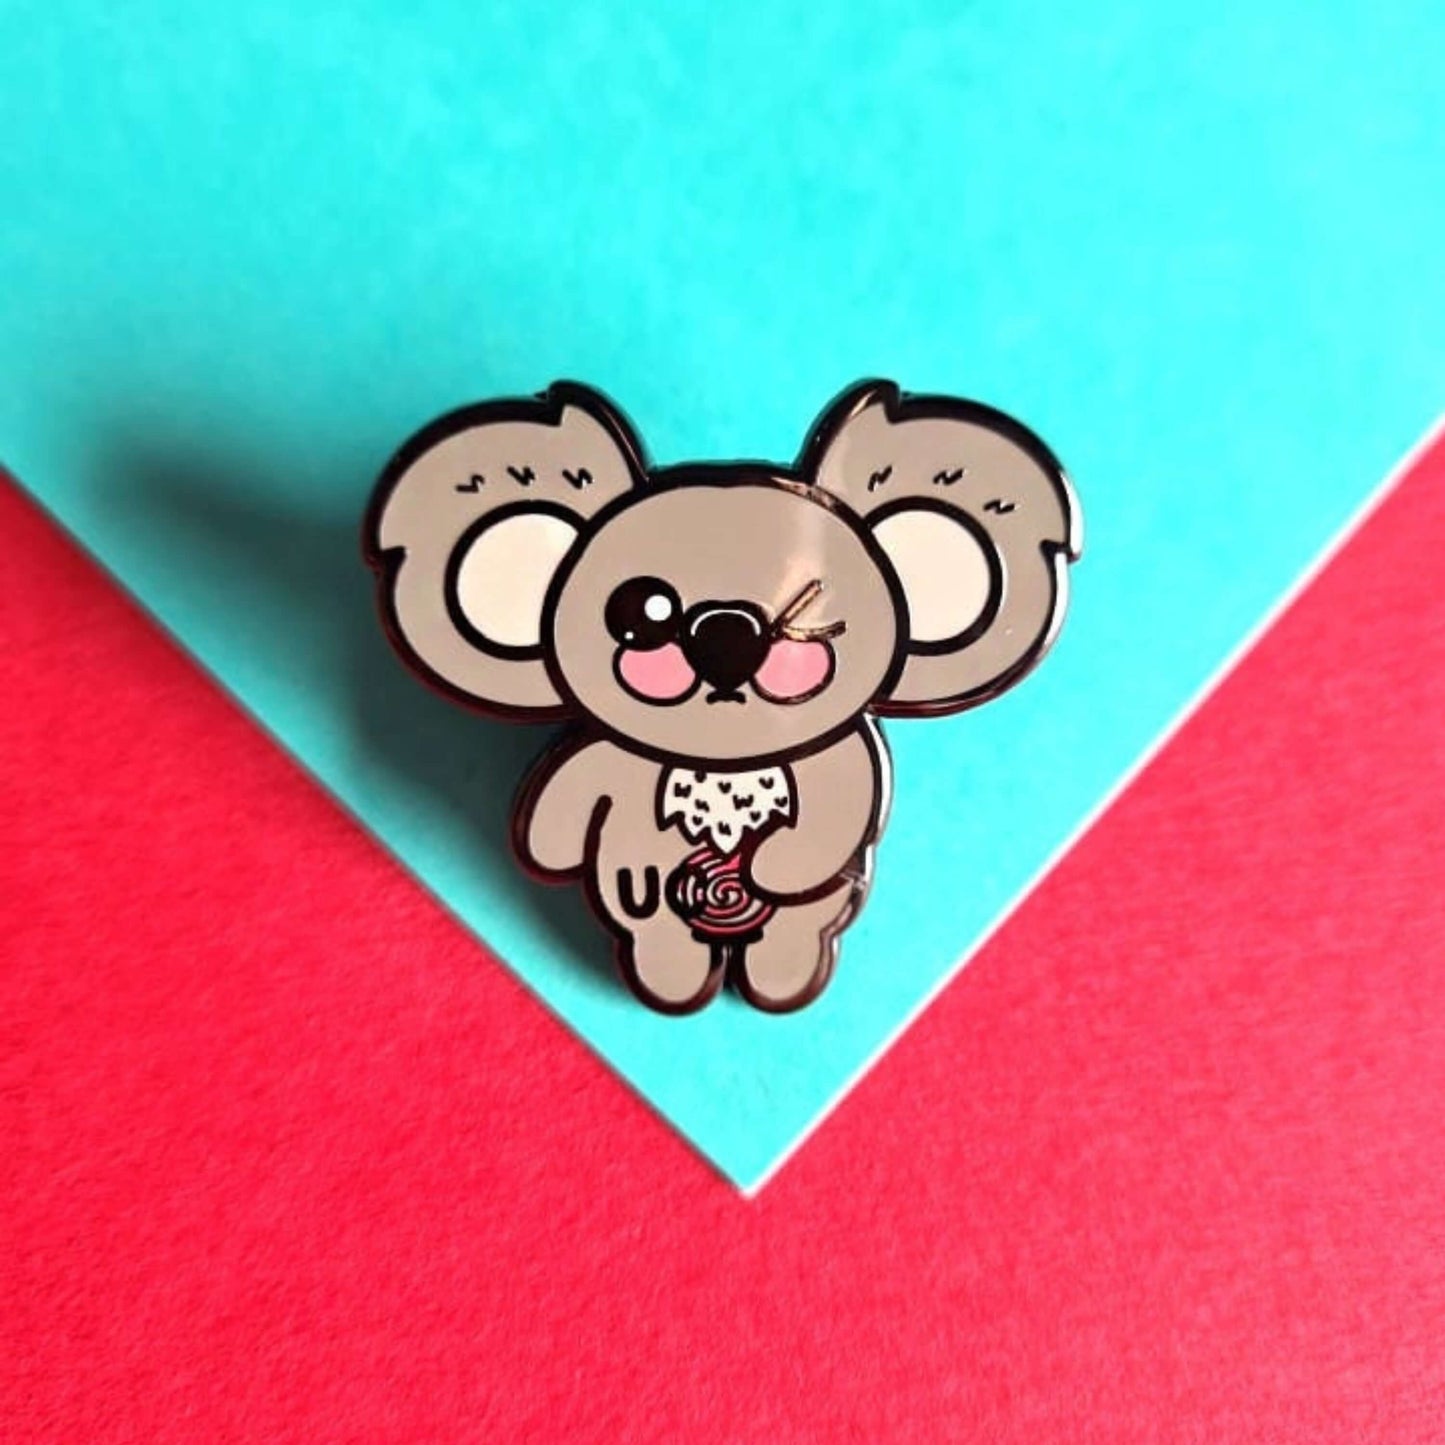 The Ulcerative Koalitis Koala Enamel Pin - Ulcerative Colitis UC on a red and blue background. The grey koala shaped enamel pin has one eye shut clutching its red swirly tummy with black text over it reading 'UC'. The hand drawn design is raising awareness for Ulcerative Colitis UC.